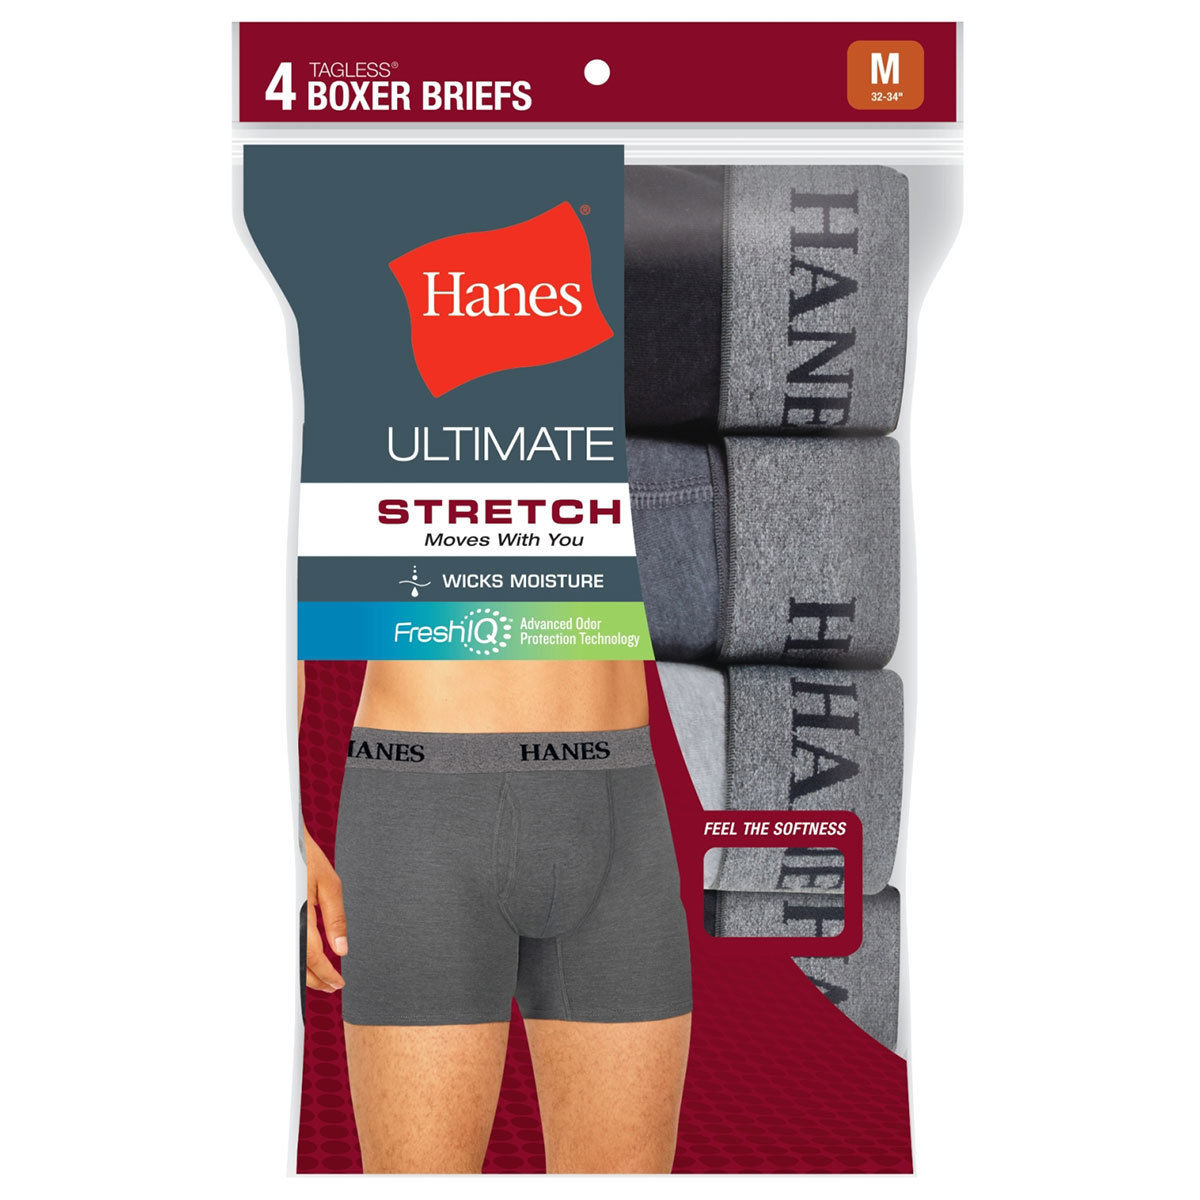 Hanes Men's Tagless Ultimate Stretch Boxer Briefs, 4-Pack